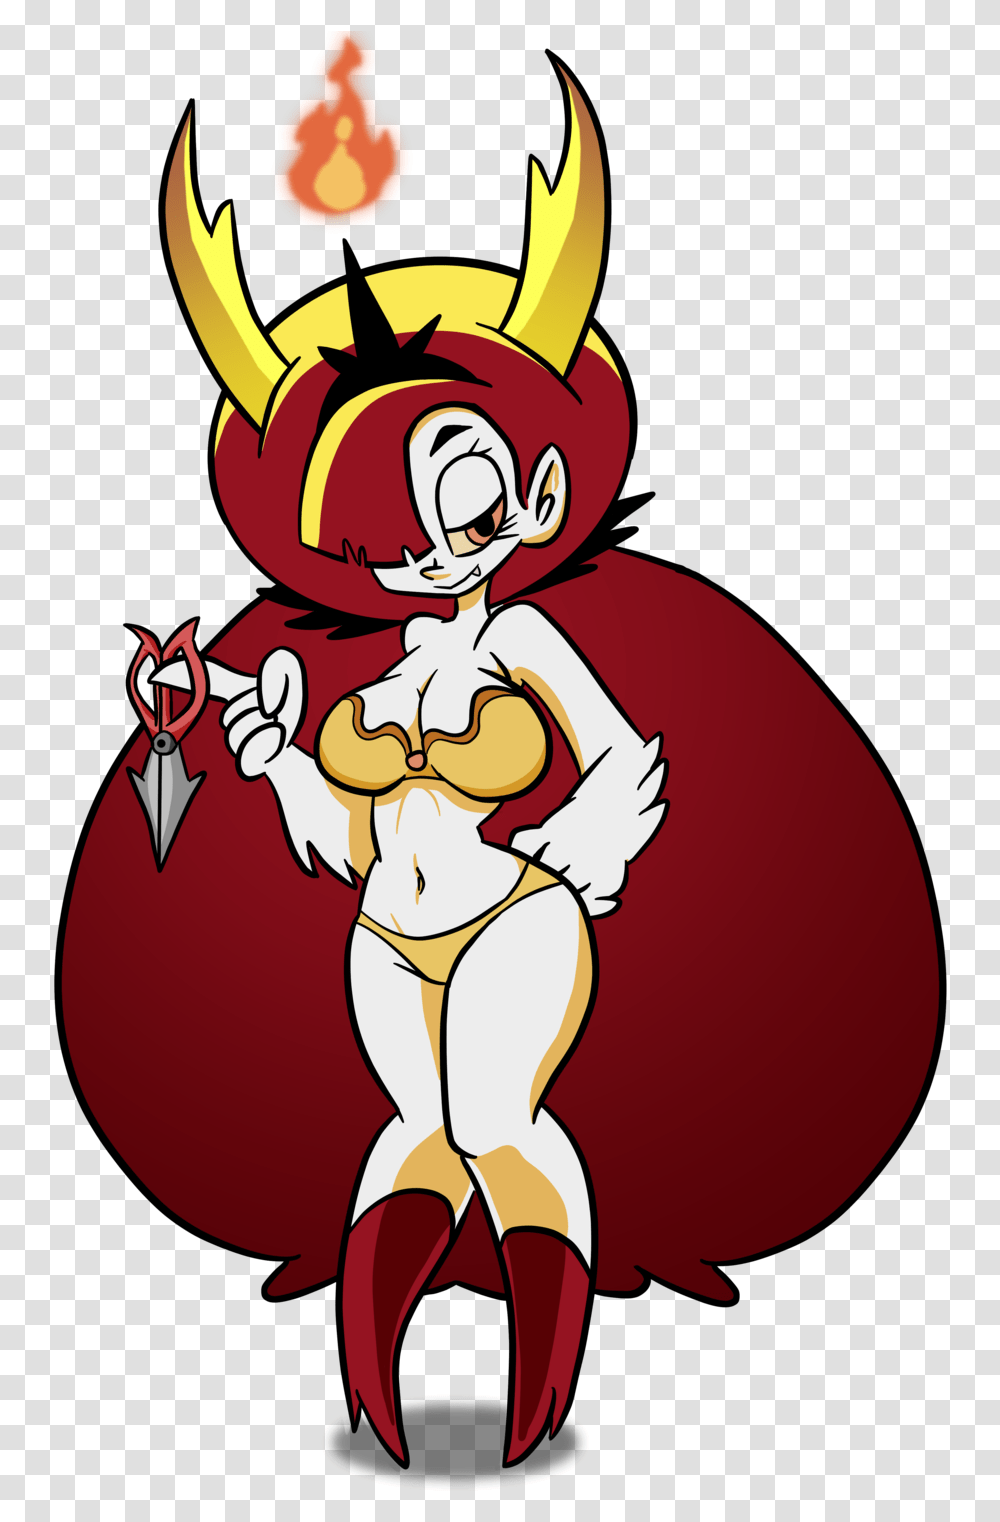 Hekapoo Is Bae Star Vs The Forces If Evil Hekapoo, Costume, Label, Face Transparent Png